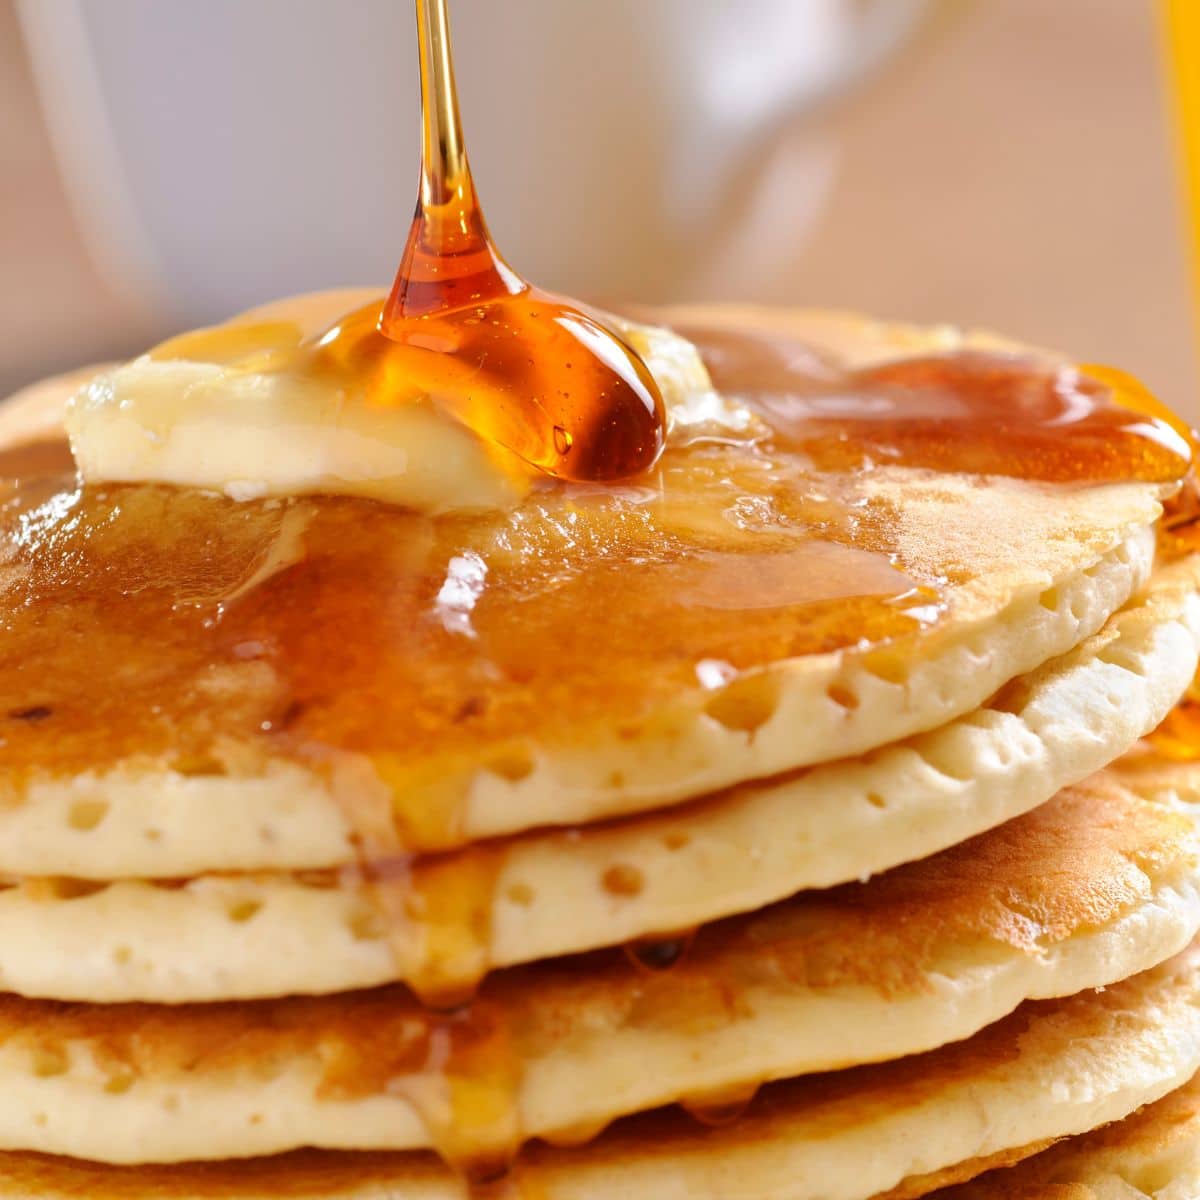 Square image of pancakes with syrup being poured over them.